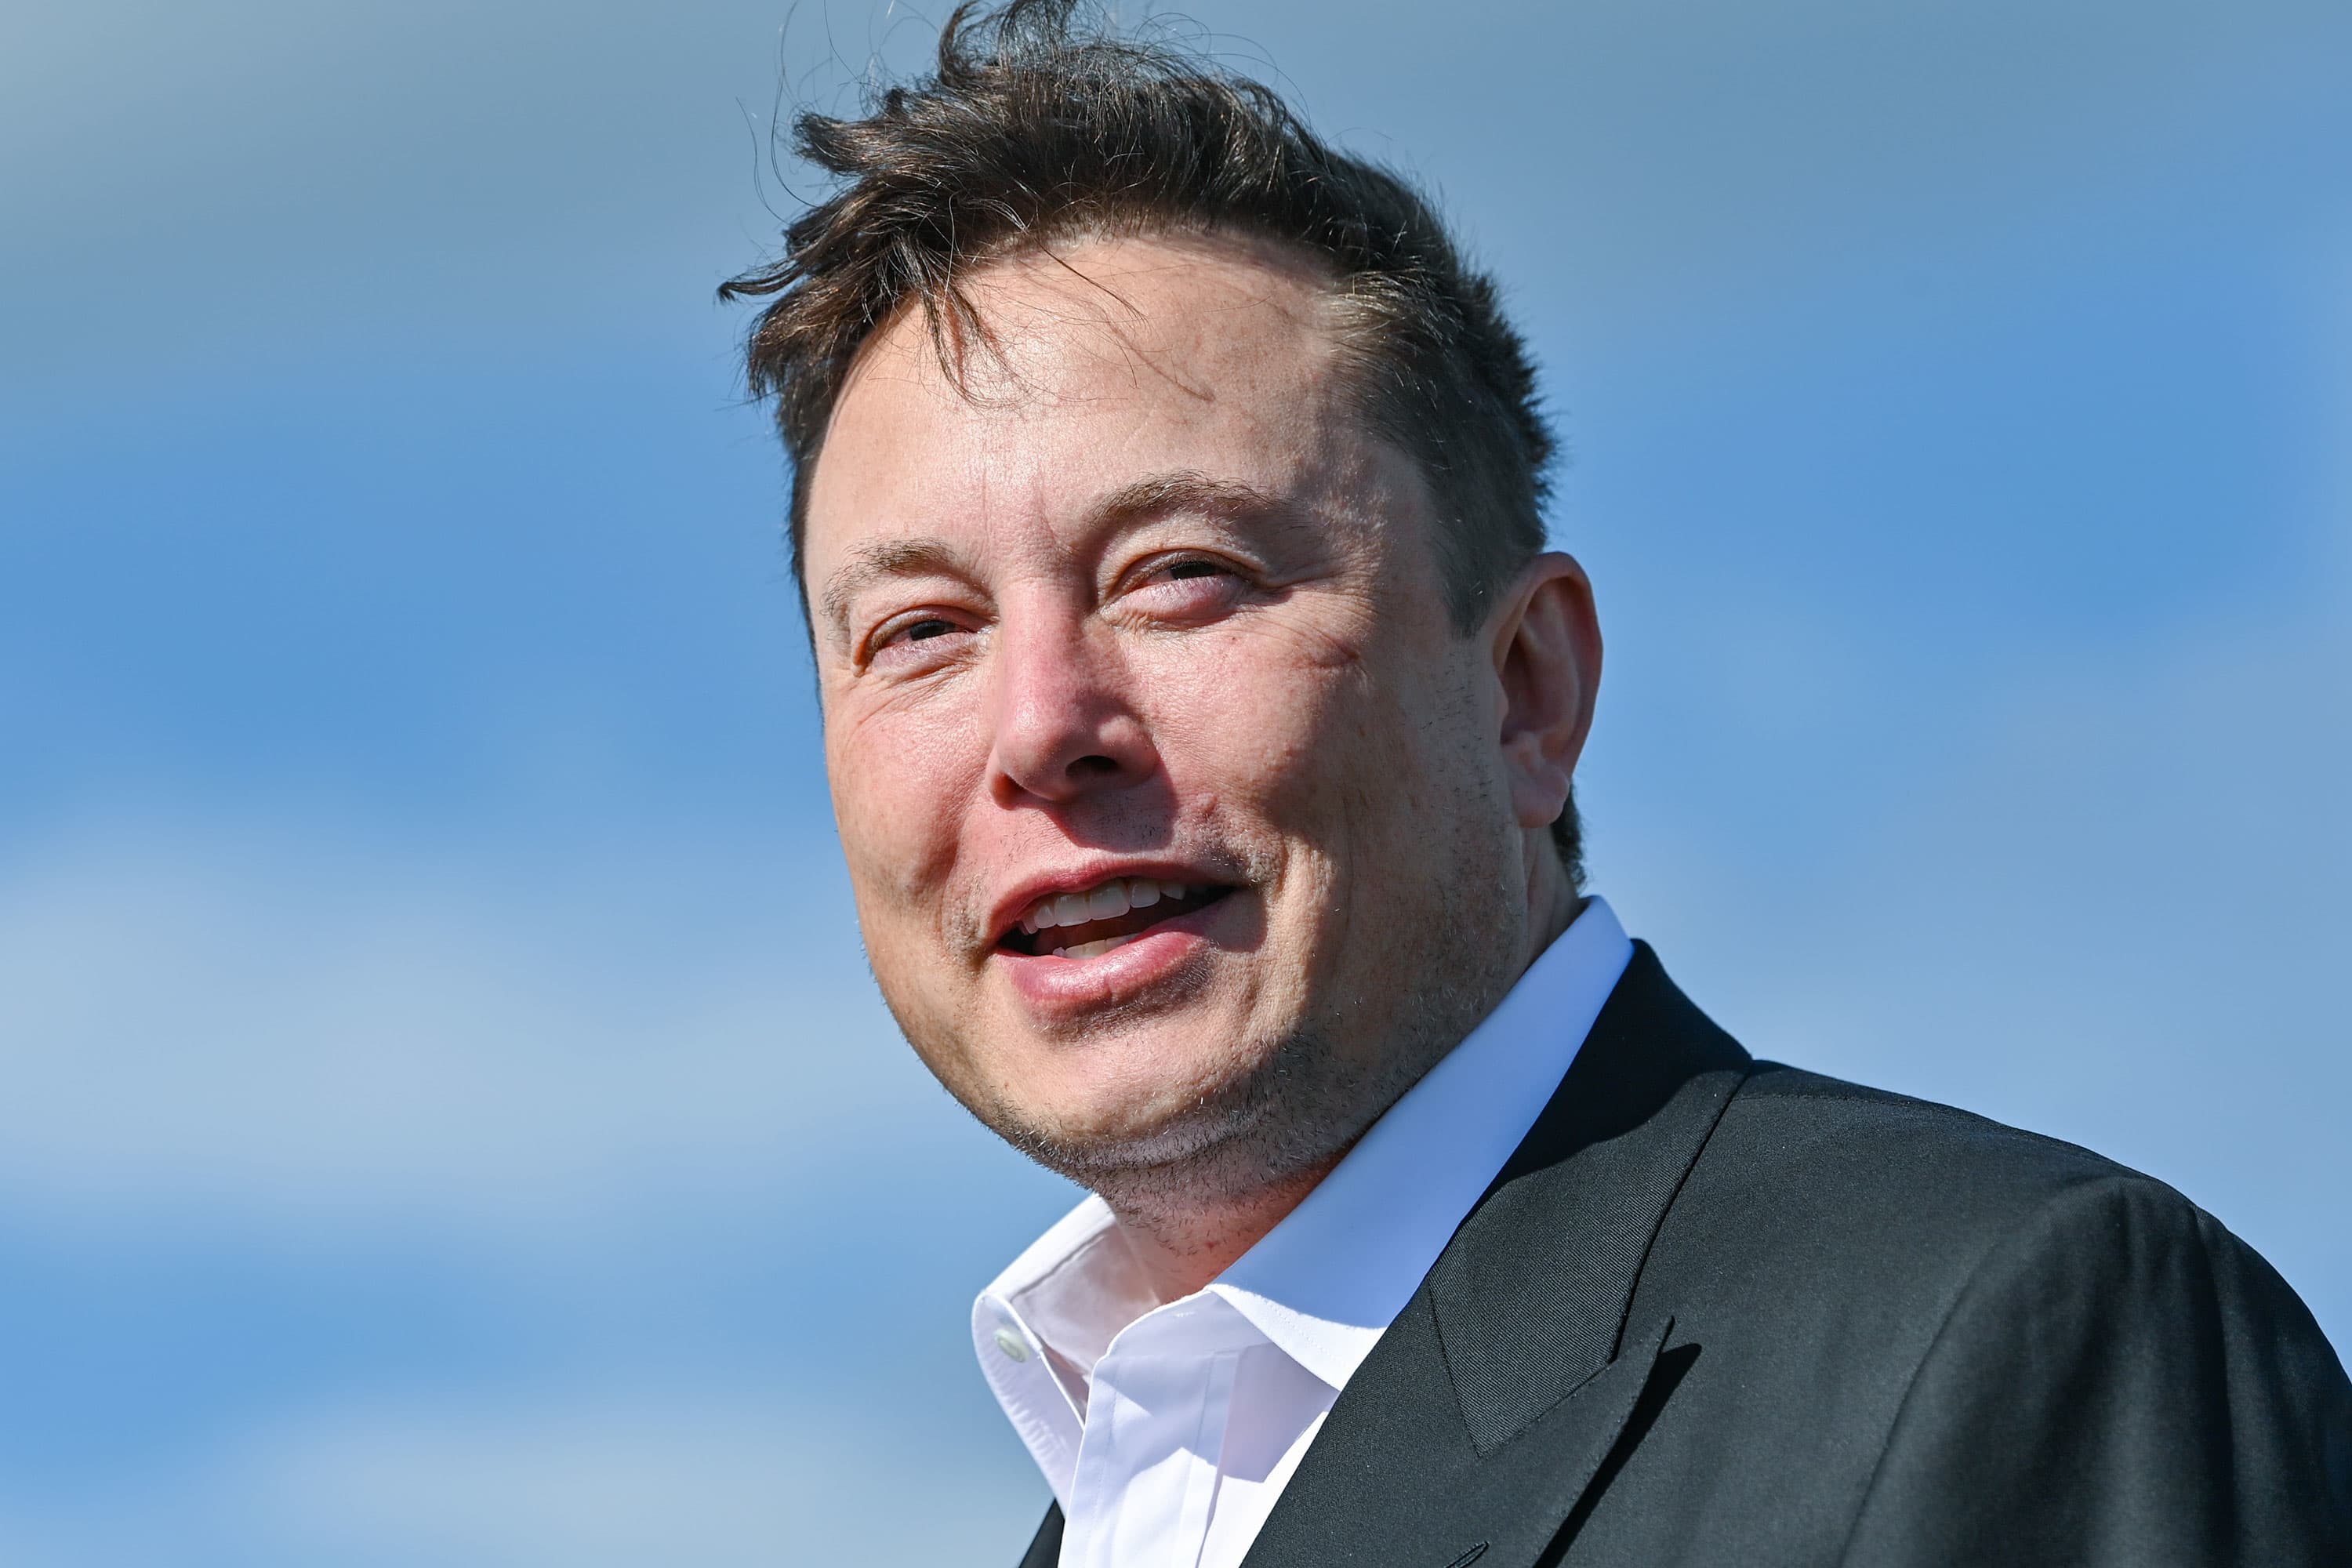 elon musk is now the richest person in